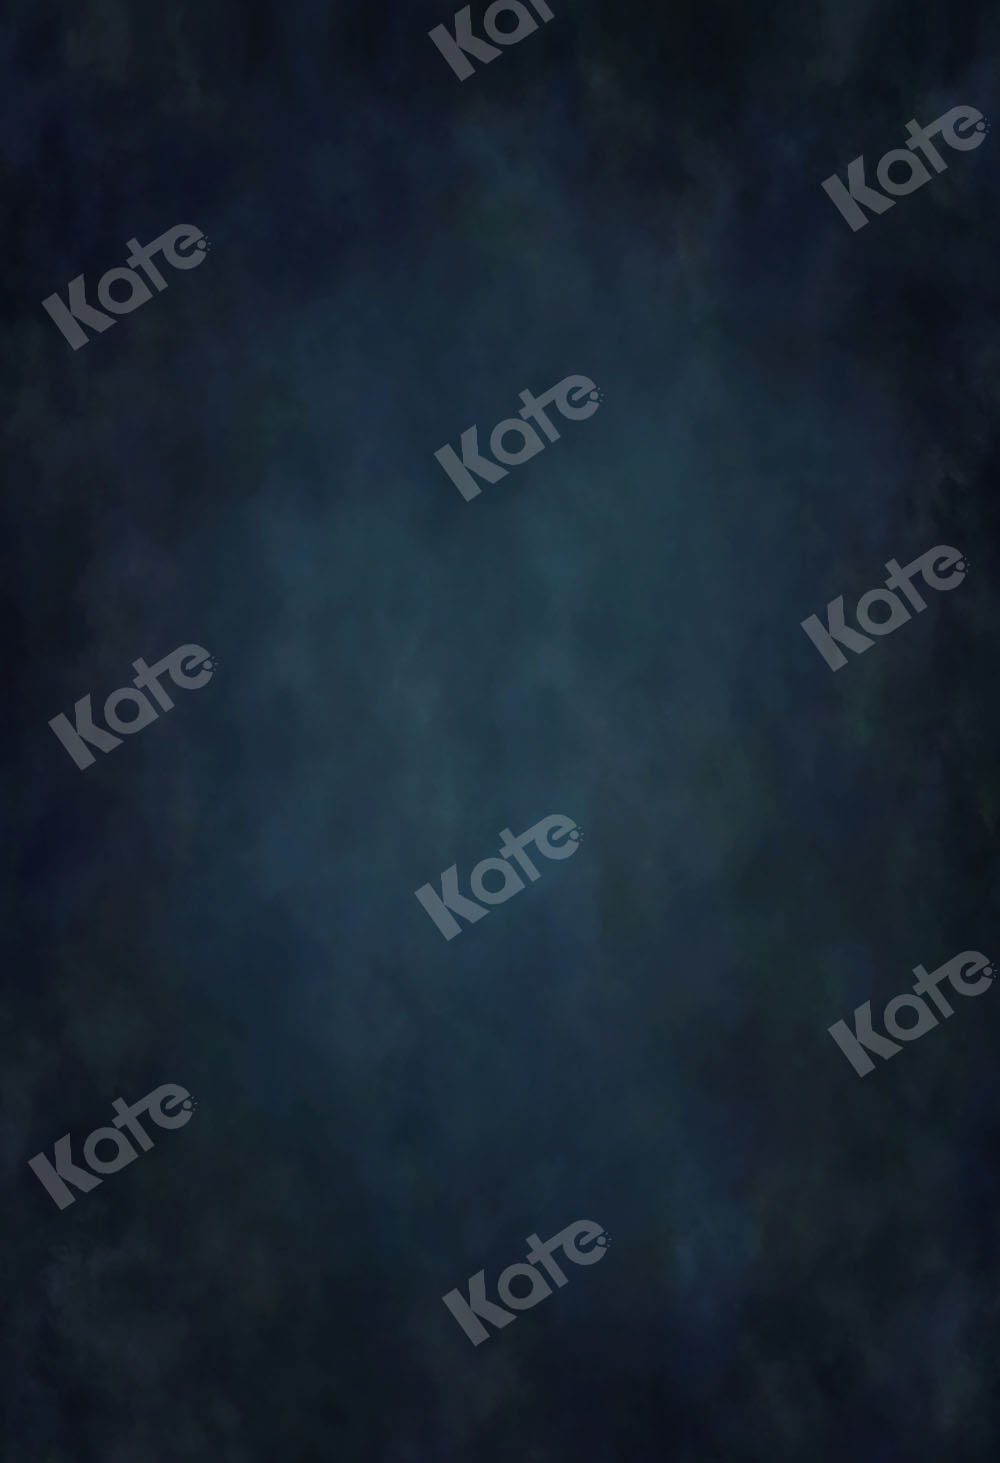 Kate Dark Blue Abstract Backdrop Designed by Kate Image